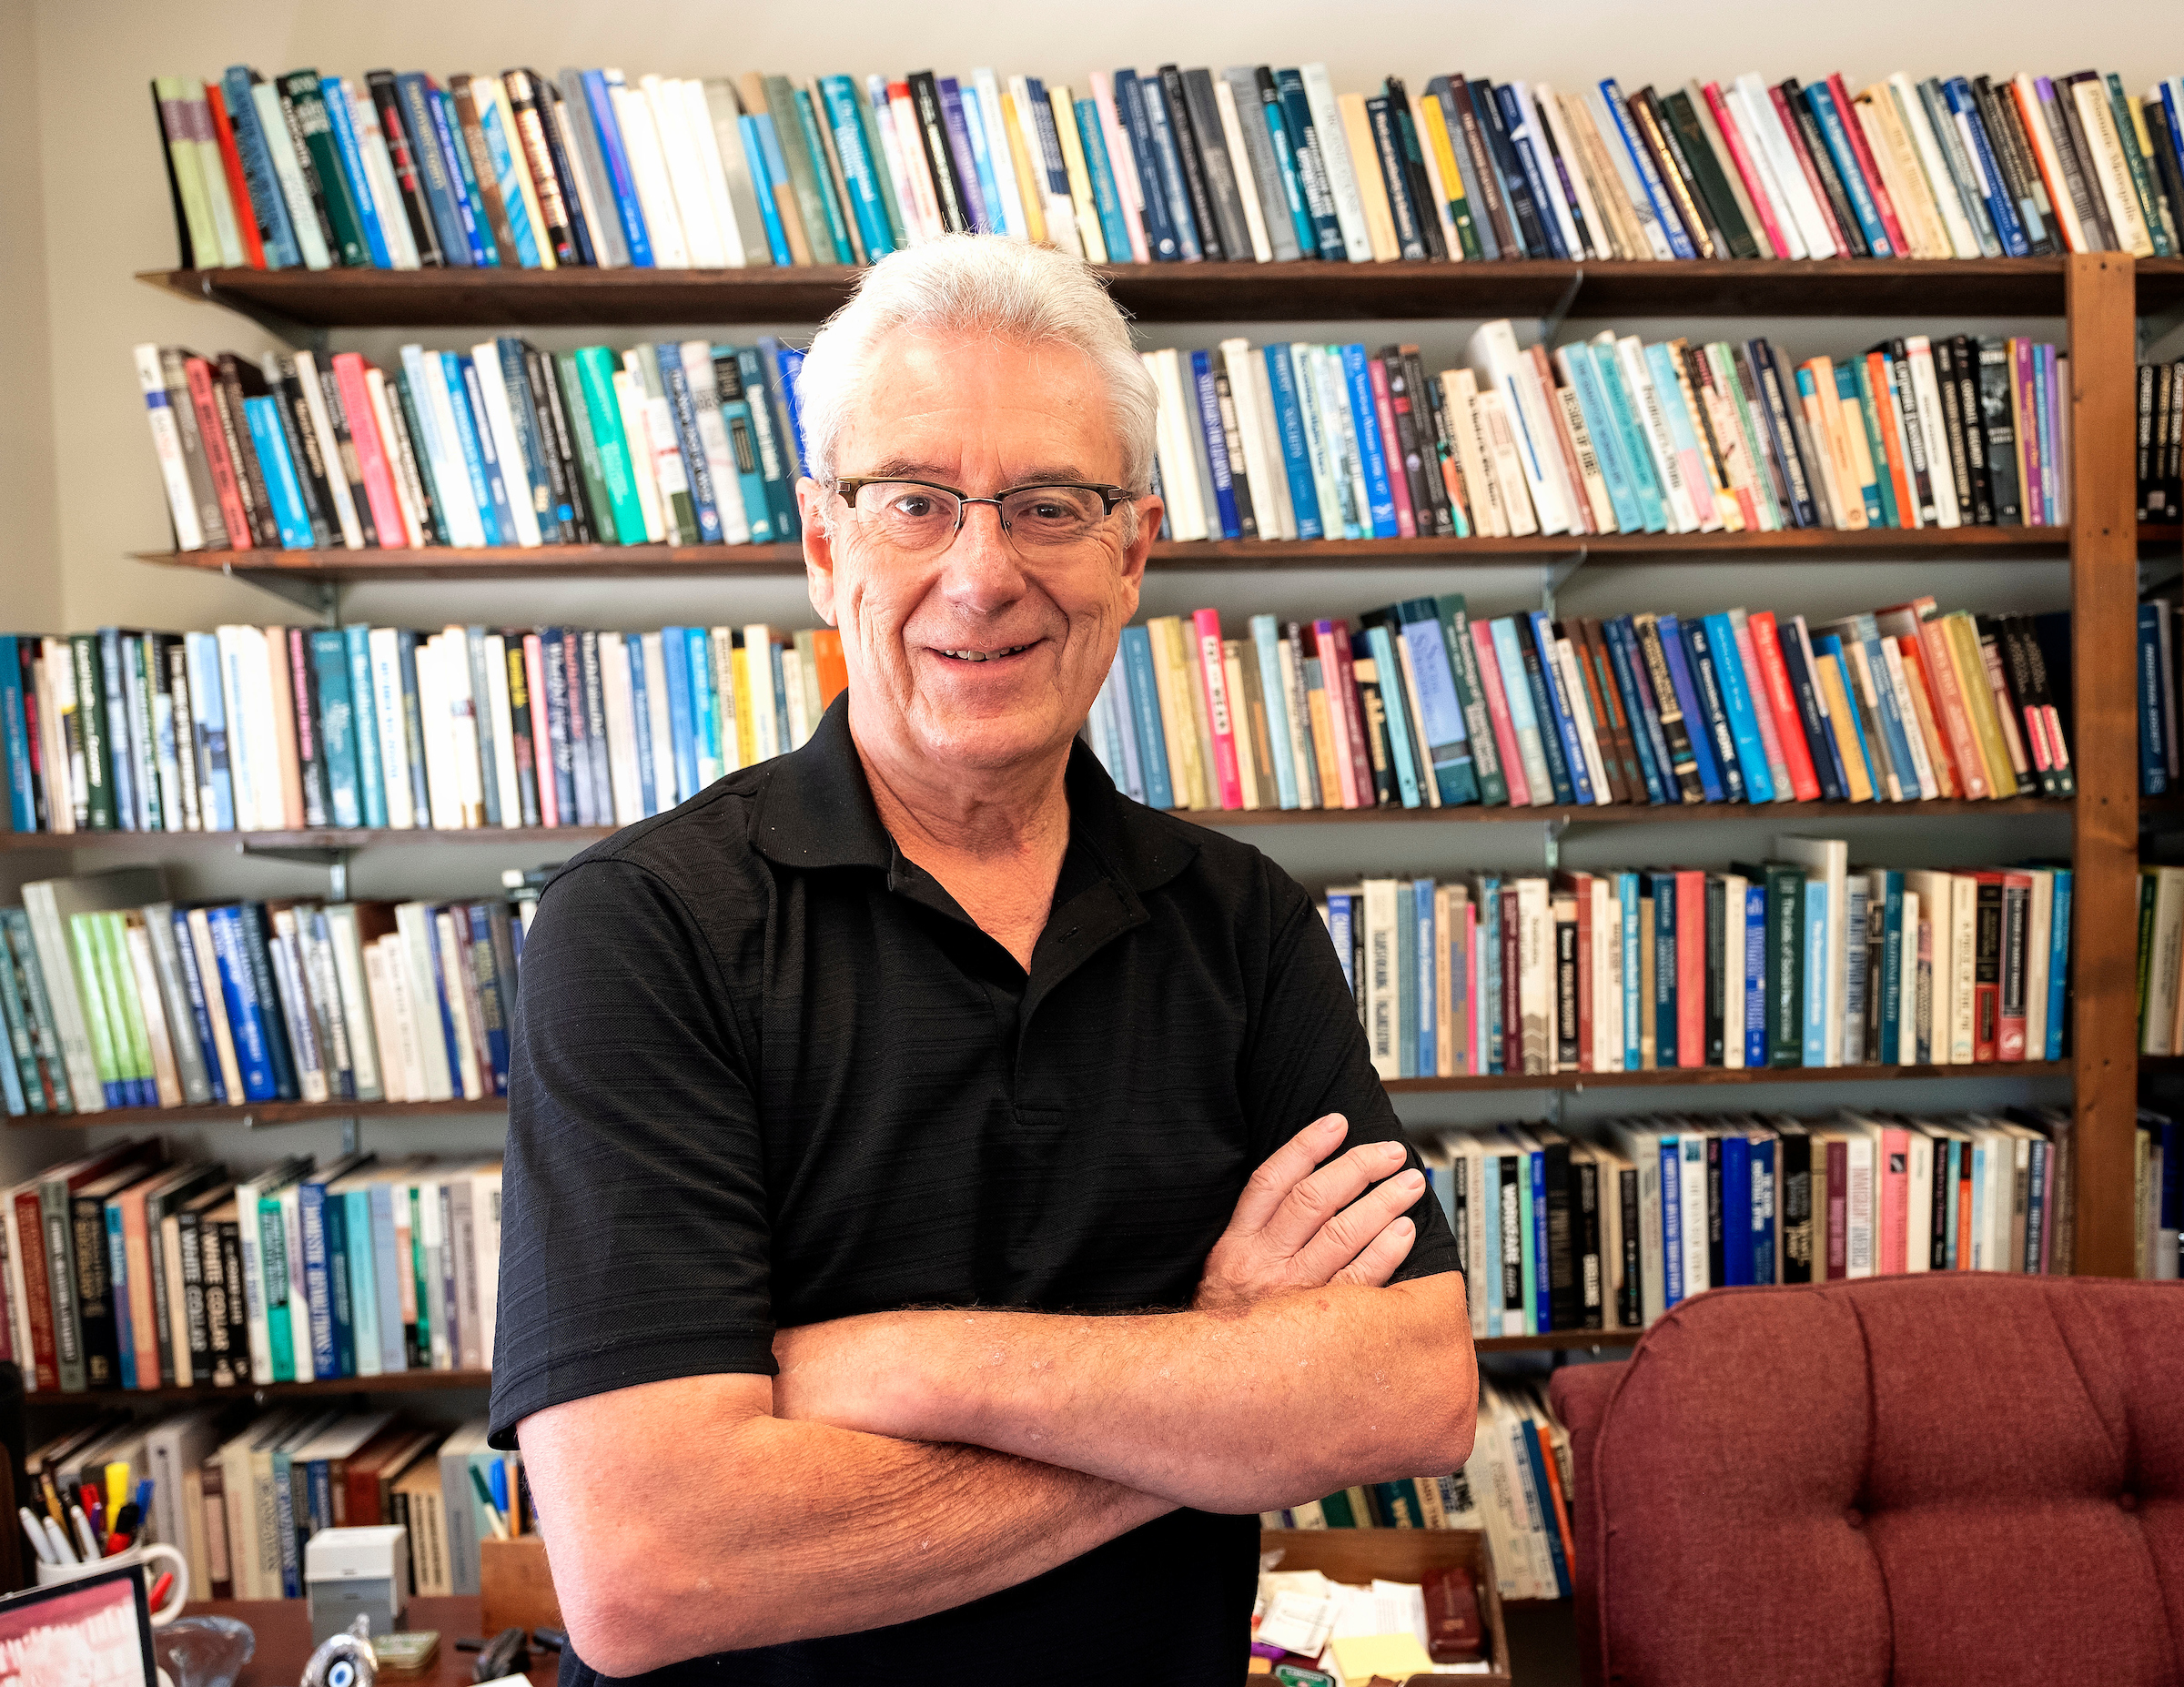 Arne Kalleberg stands in his office with arms crossed, bookshelves filled with books behind him.